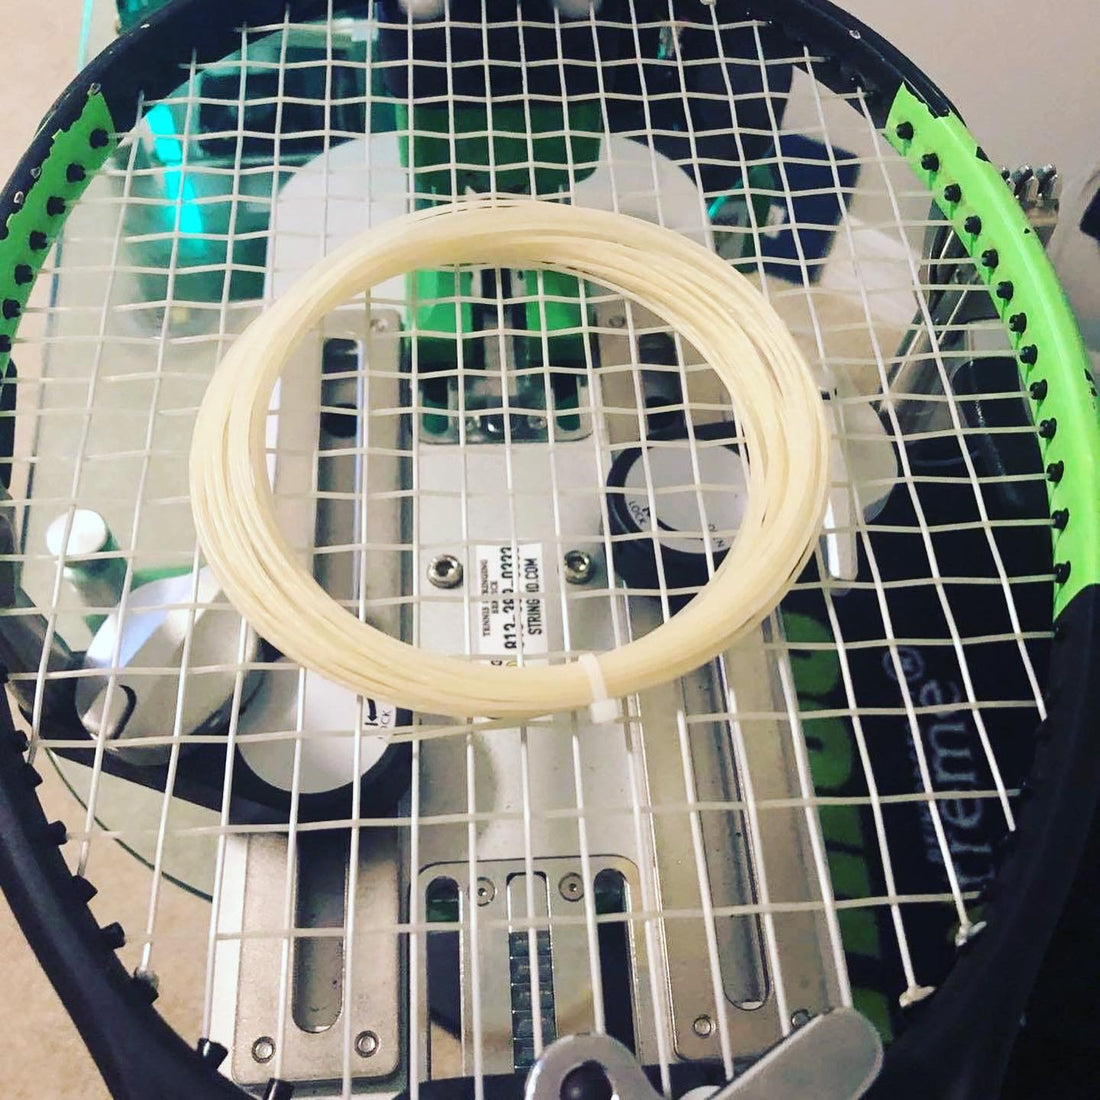 String tension and what does it do to the racquet?